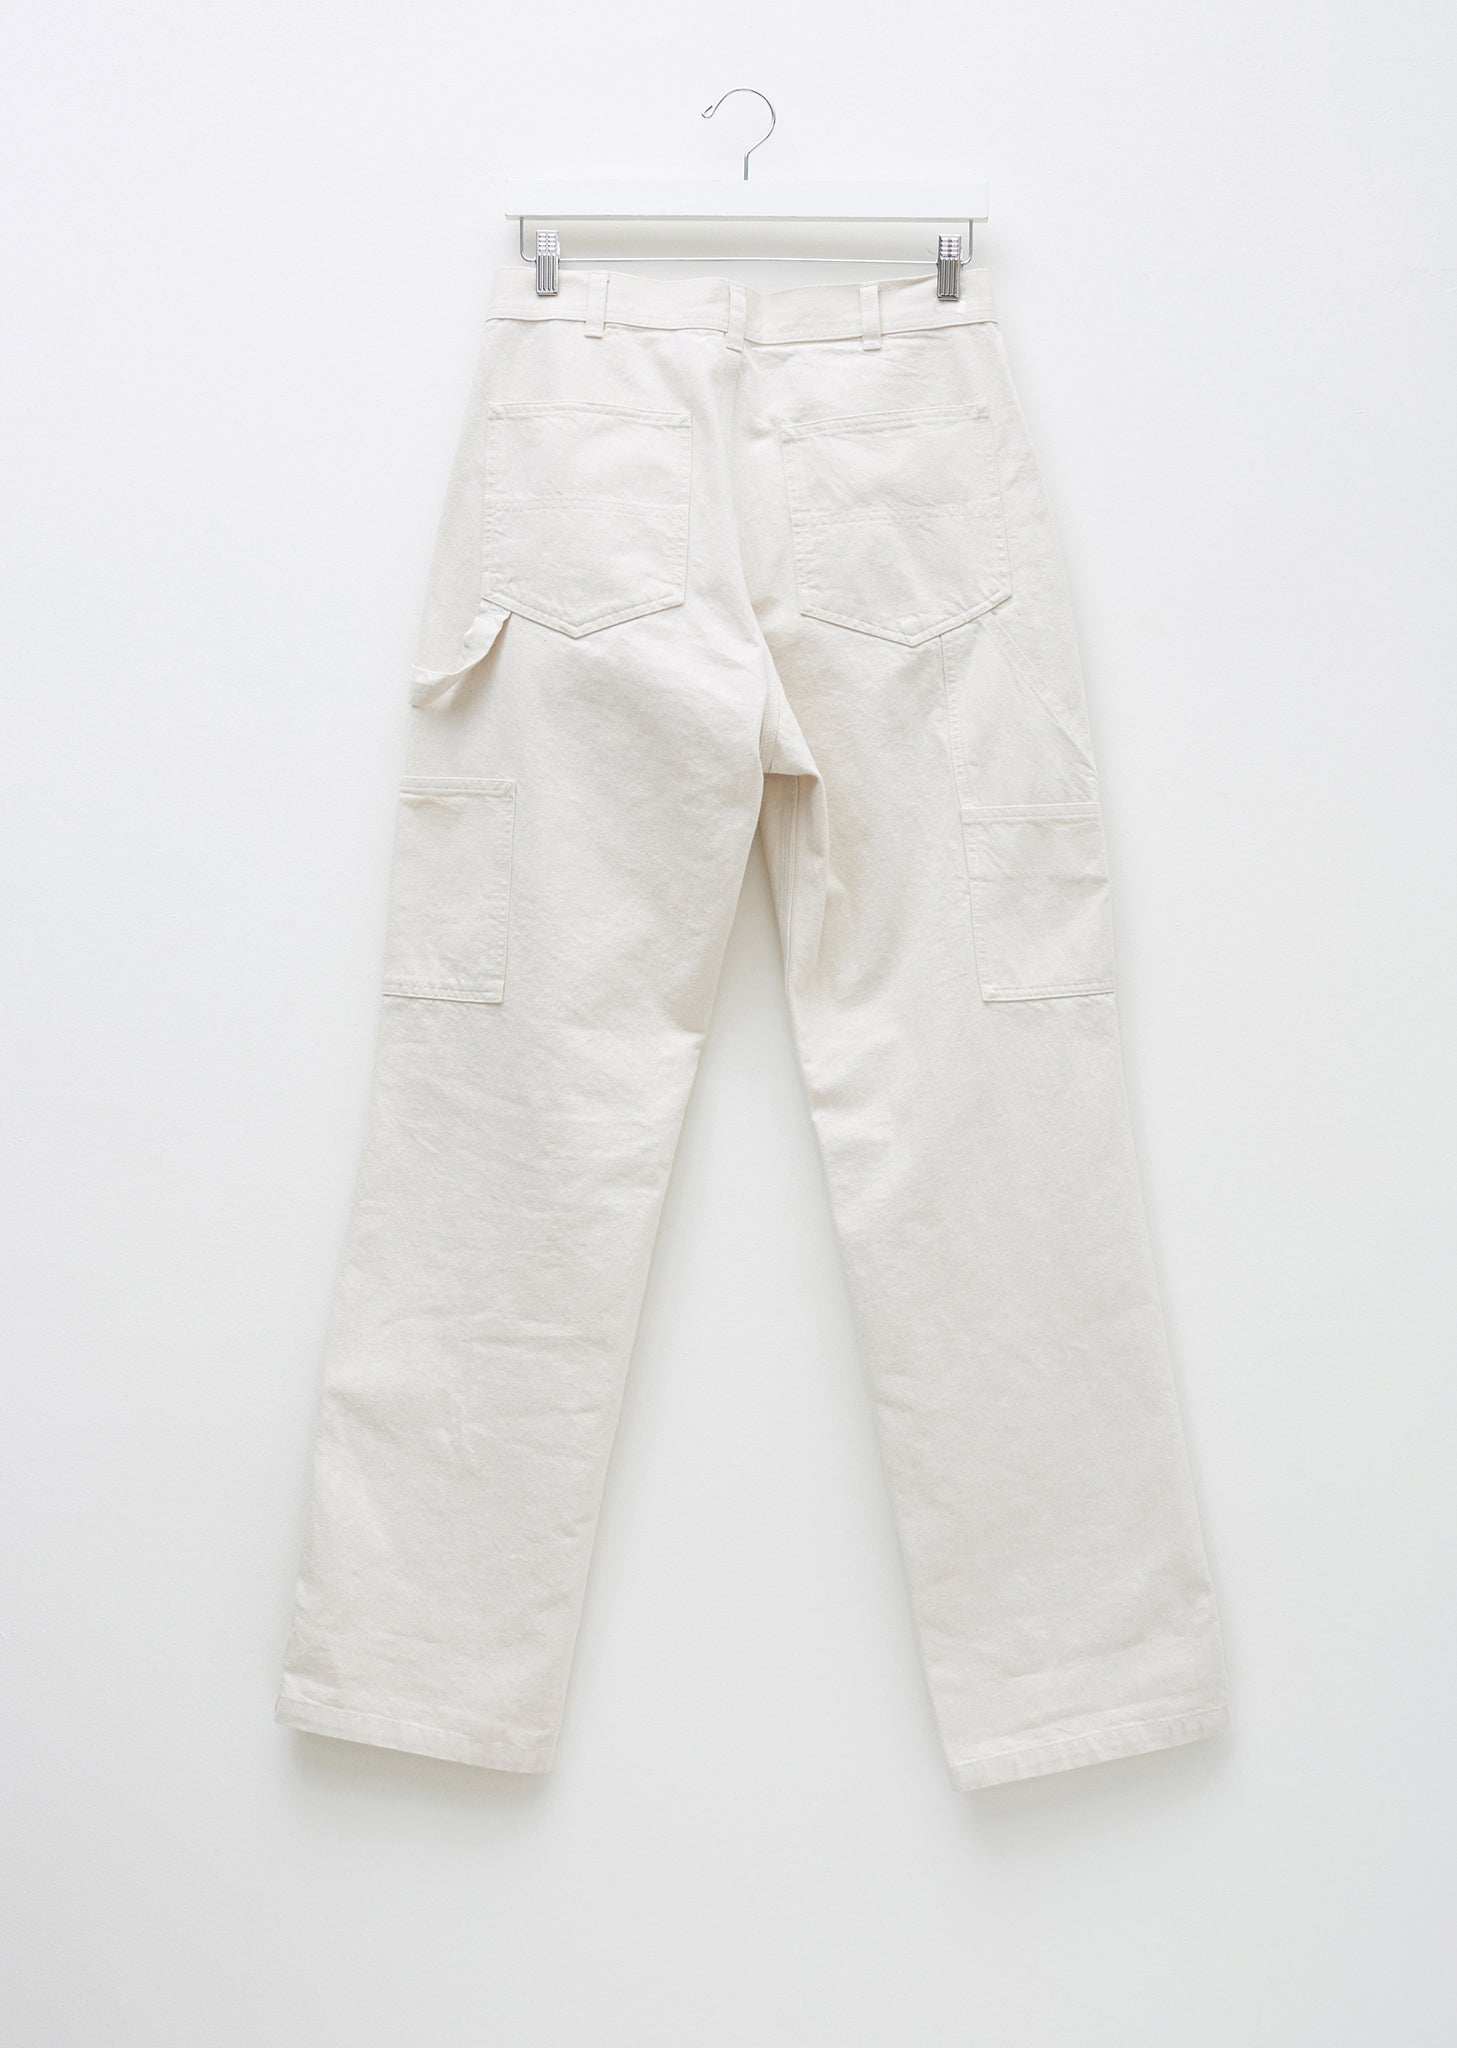 Work trousers for painters from eShop